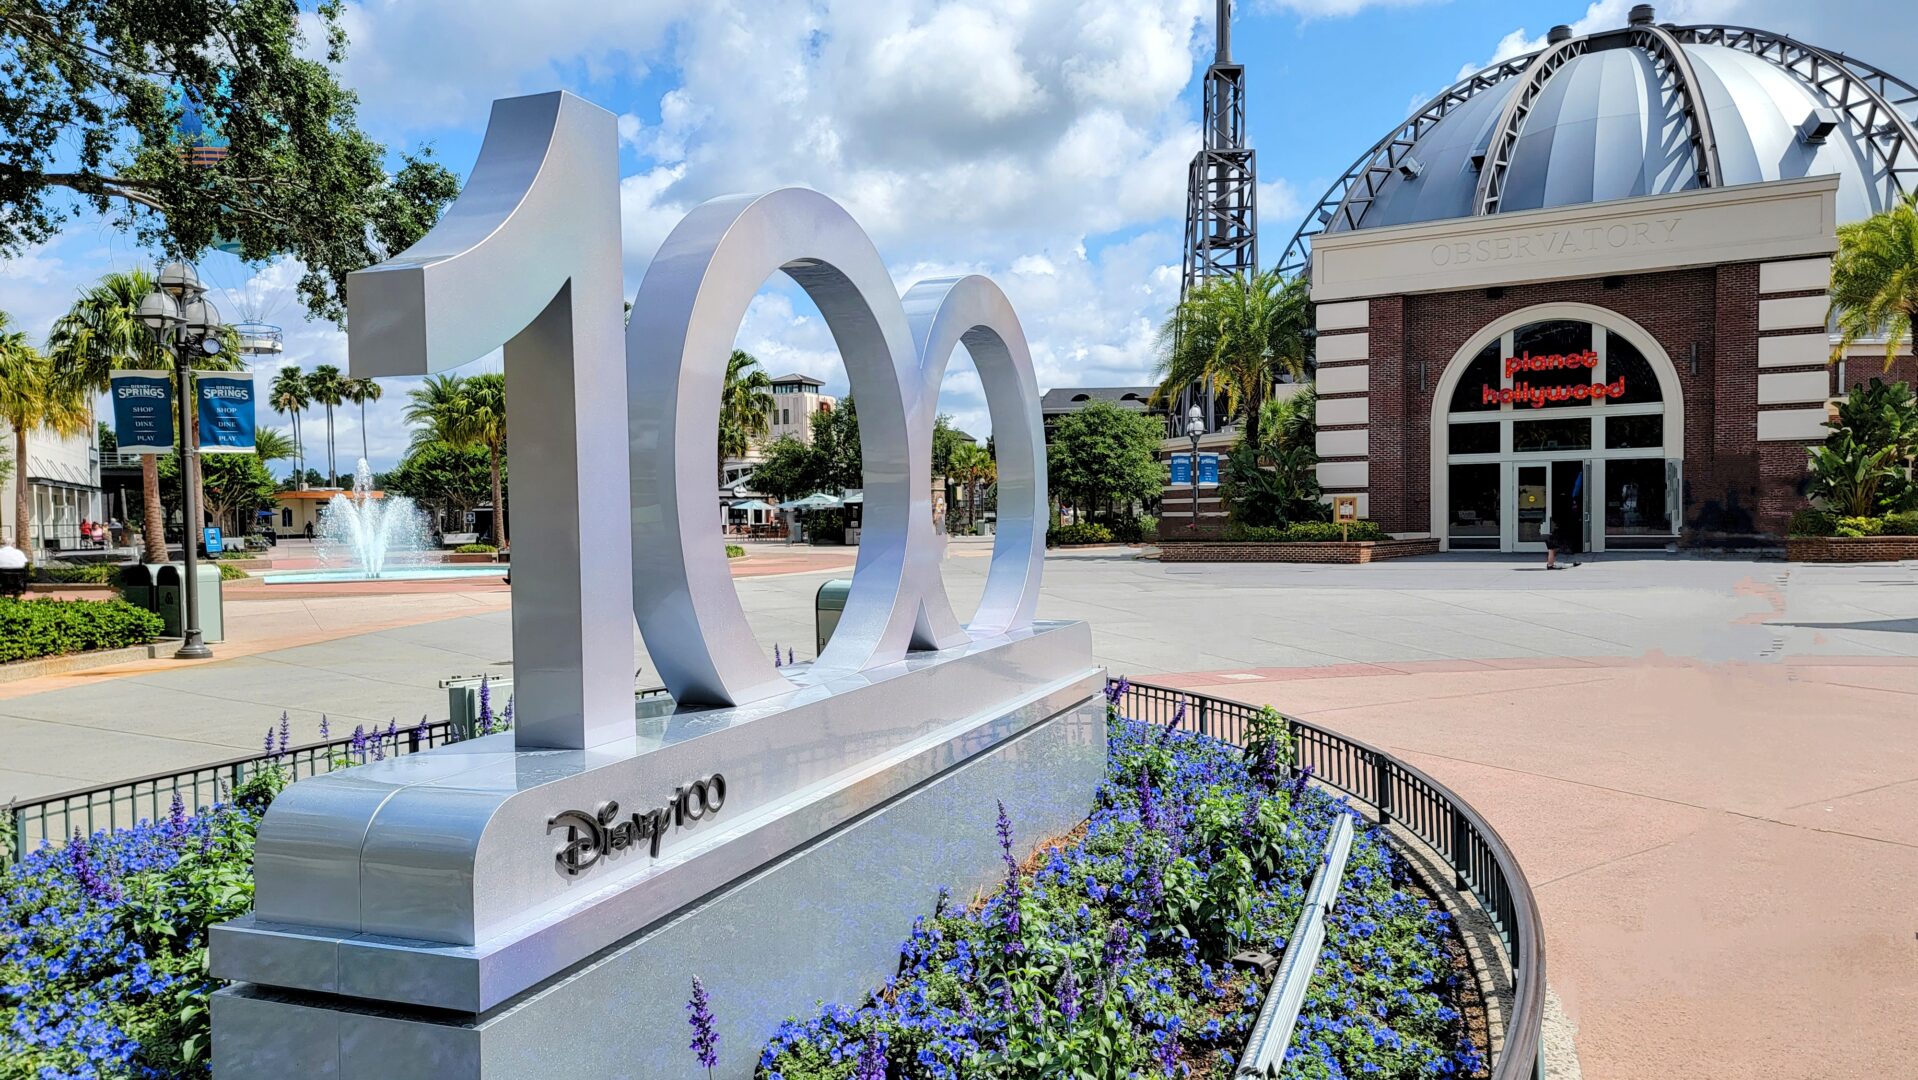 New Disney100 Decorations Now Up at Disney Springs